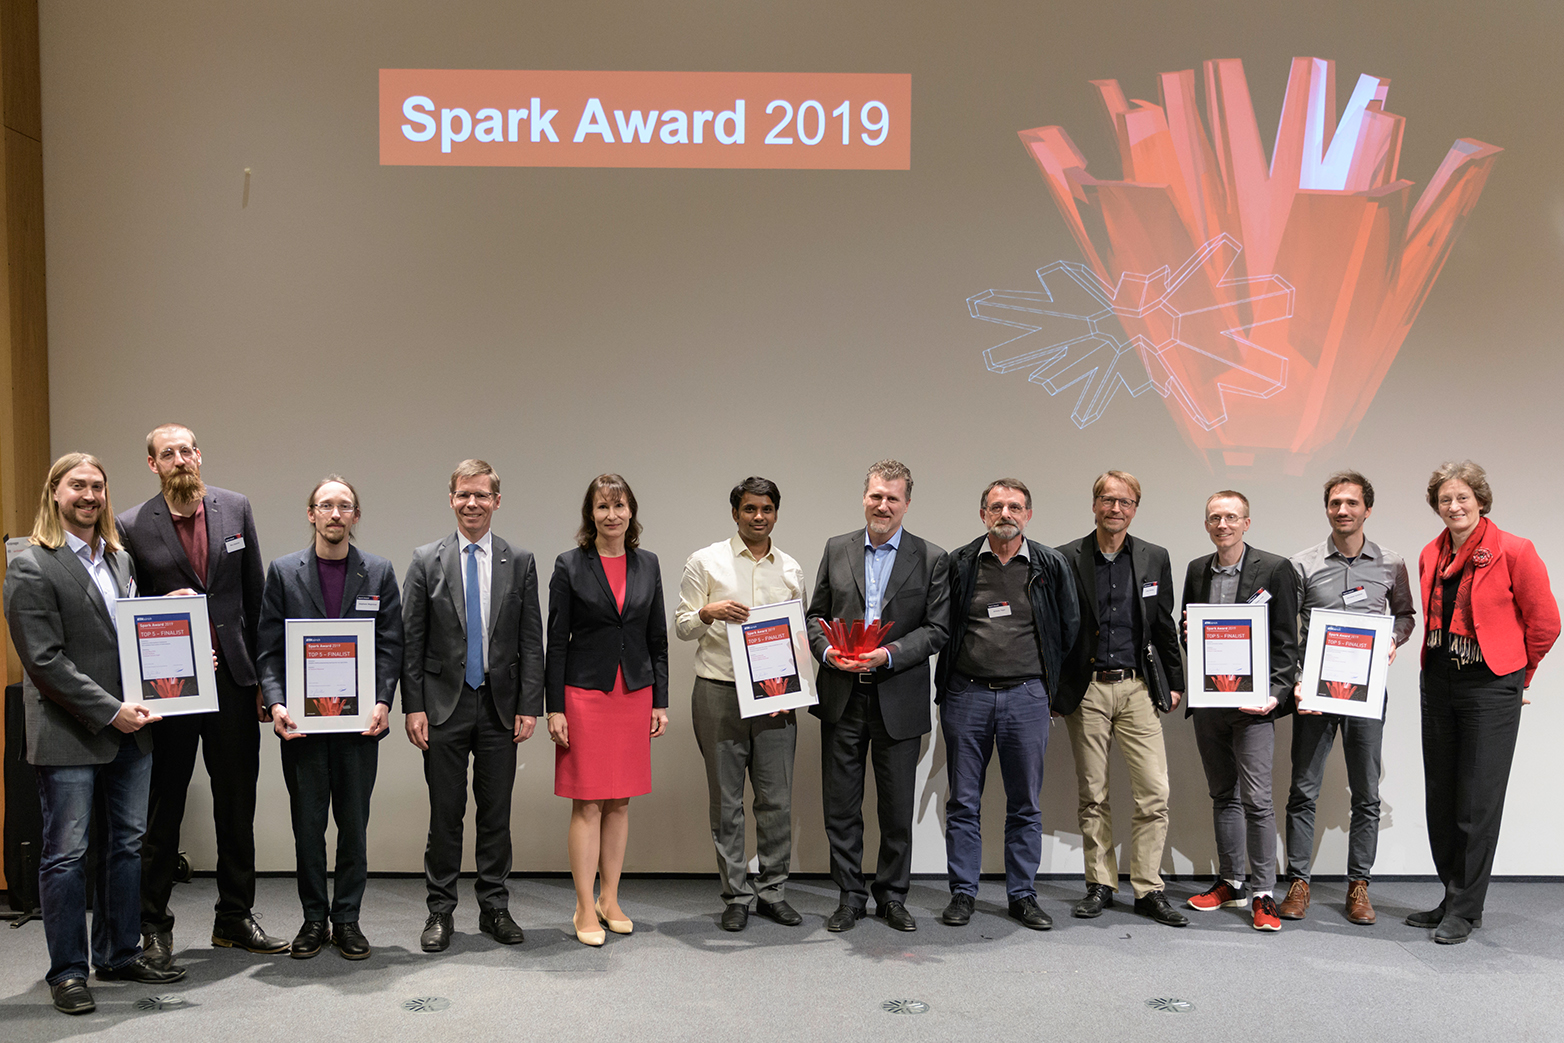 Enlarged view: Five projects were nominated and honoured during the award ceremony. (Photograph: O. Bartenschlager / ETH Zurich)